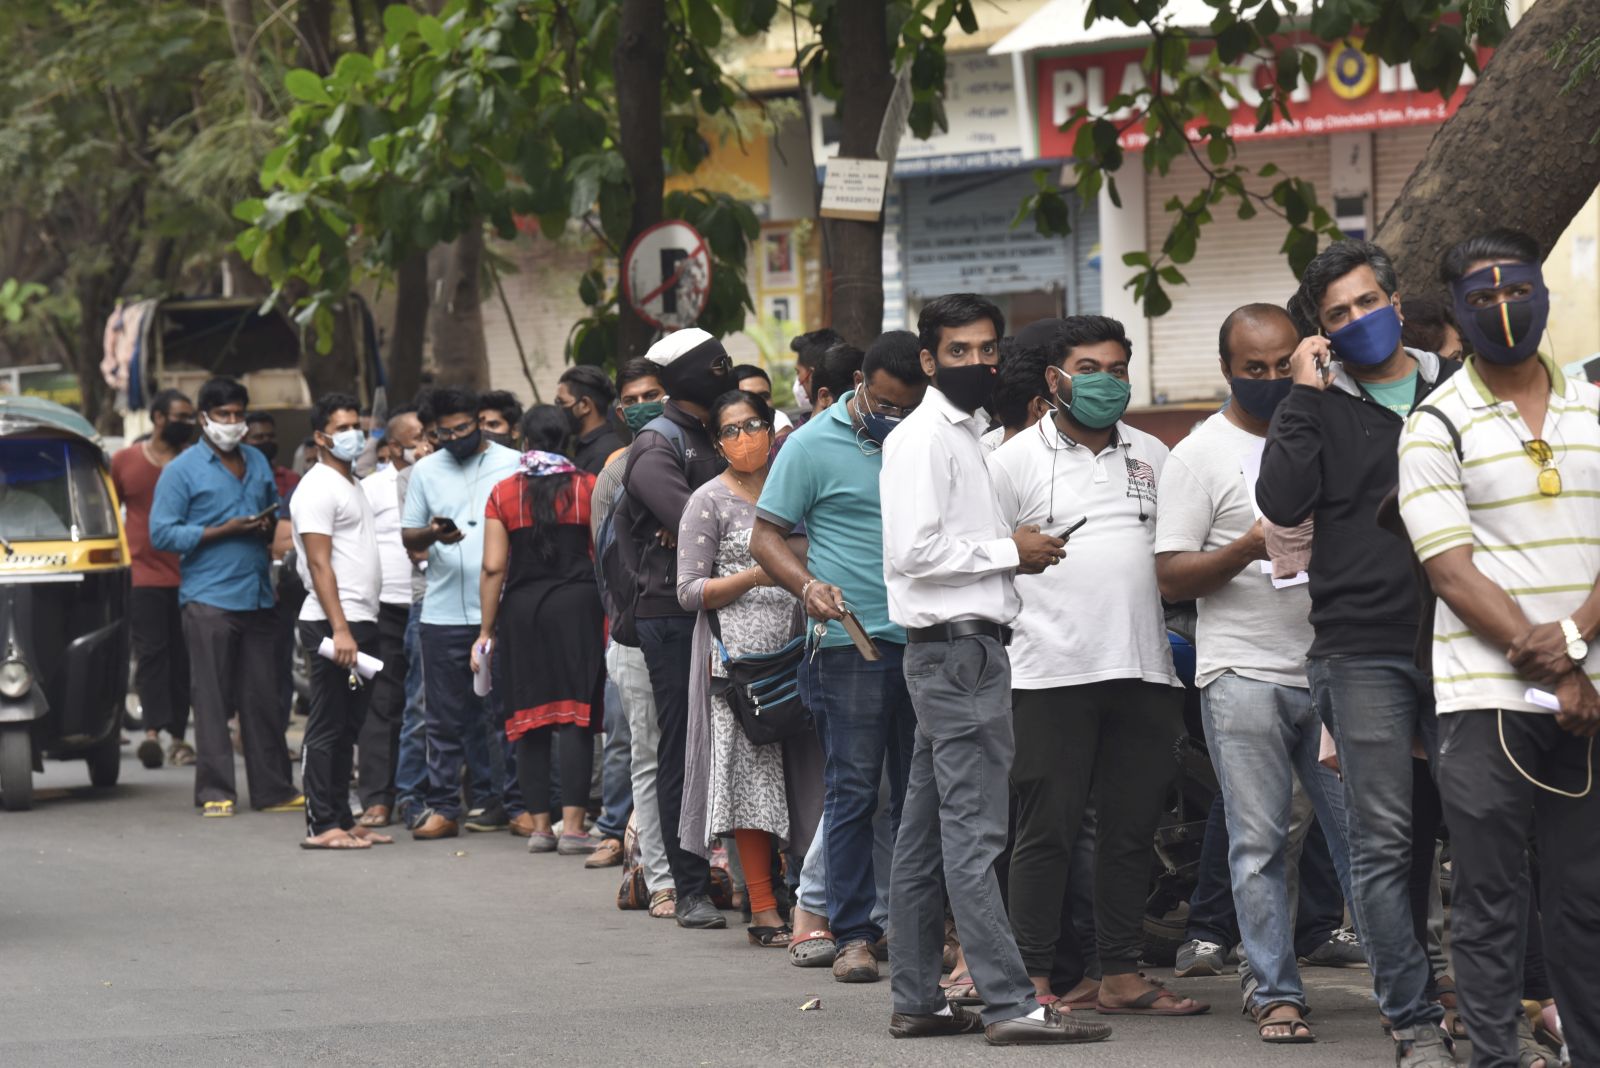 People lining up in the Indian city of Pune to buy Remdesivir in April 2021.